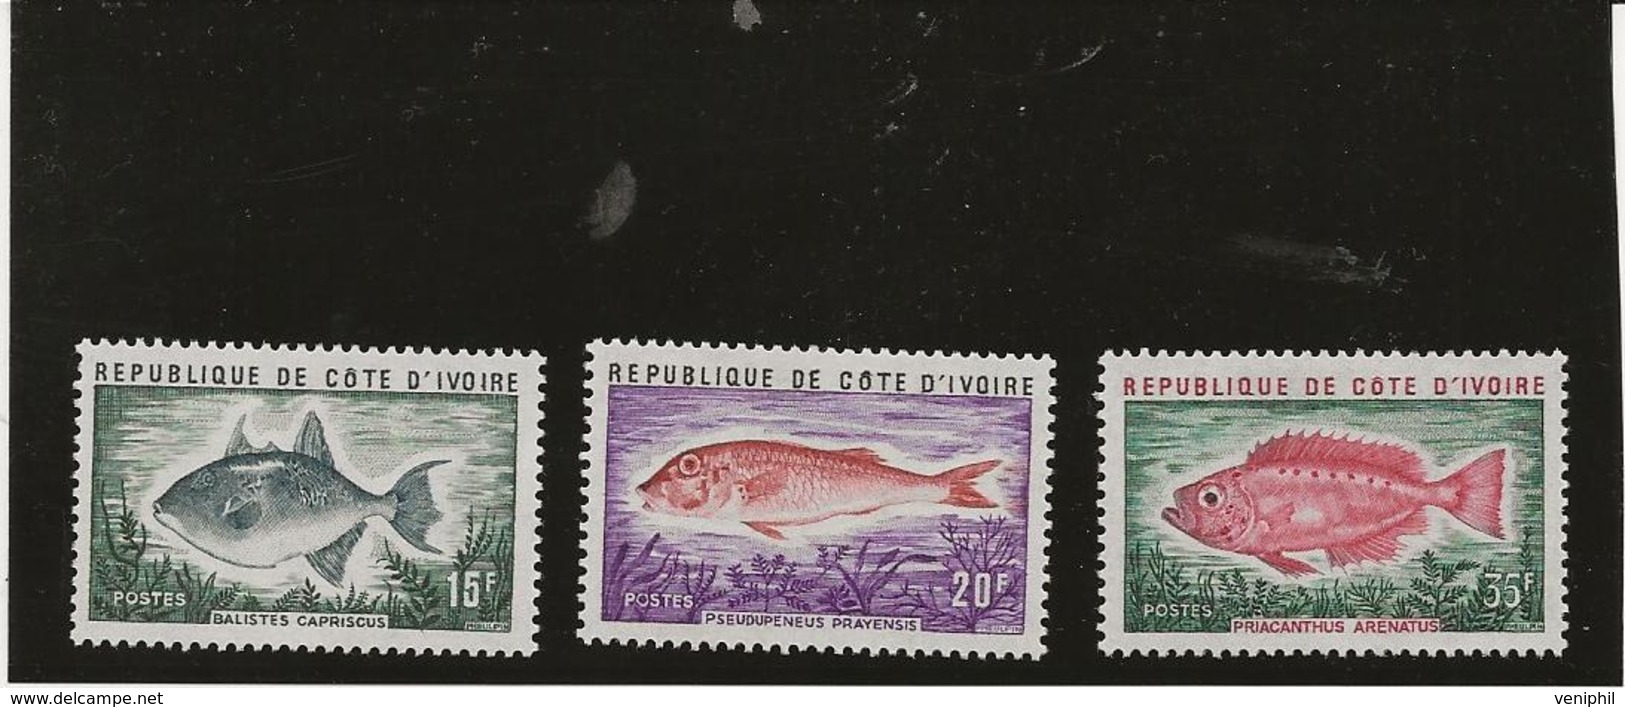 COTE D'IVOIRE - SERIE POISSONS N° 354 A 356 NEUF INFIME CHARNIERE - ANNEE 1973 -COTE : 10 € - Ivoorkust (1960-...)